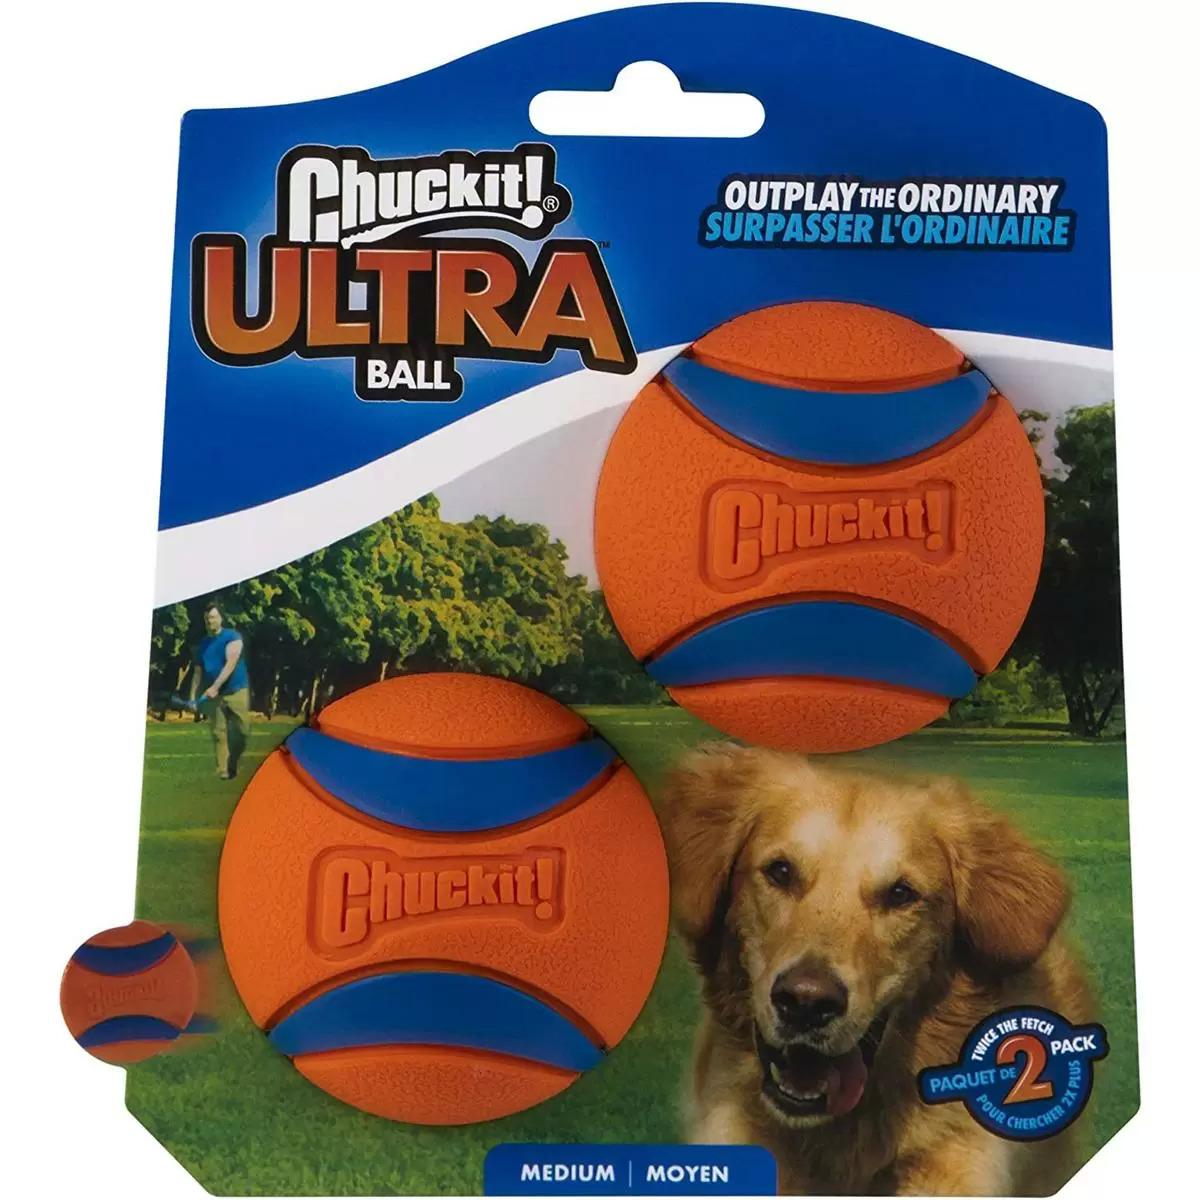 Chuckit Medium Ultra Ball Dog Toy 2 Pack for $3.63 Shipped